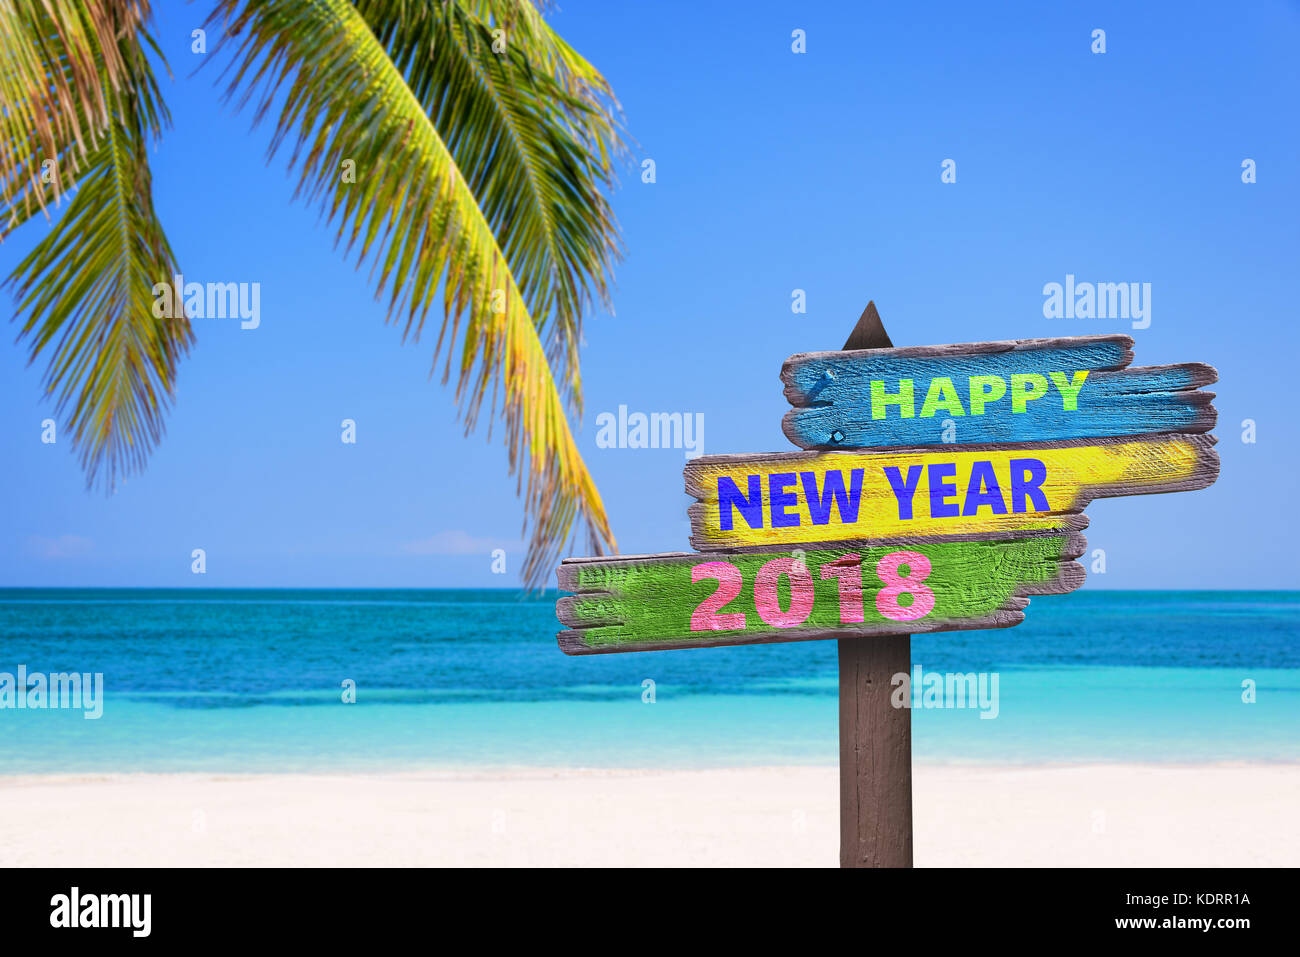 Hapy new year 2018 on a colored wooden direction signs, beach and palm tree background Stock Photo